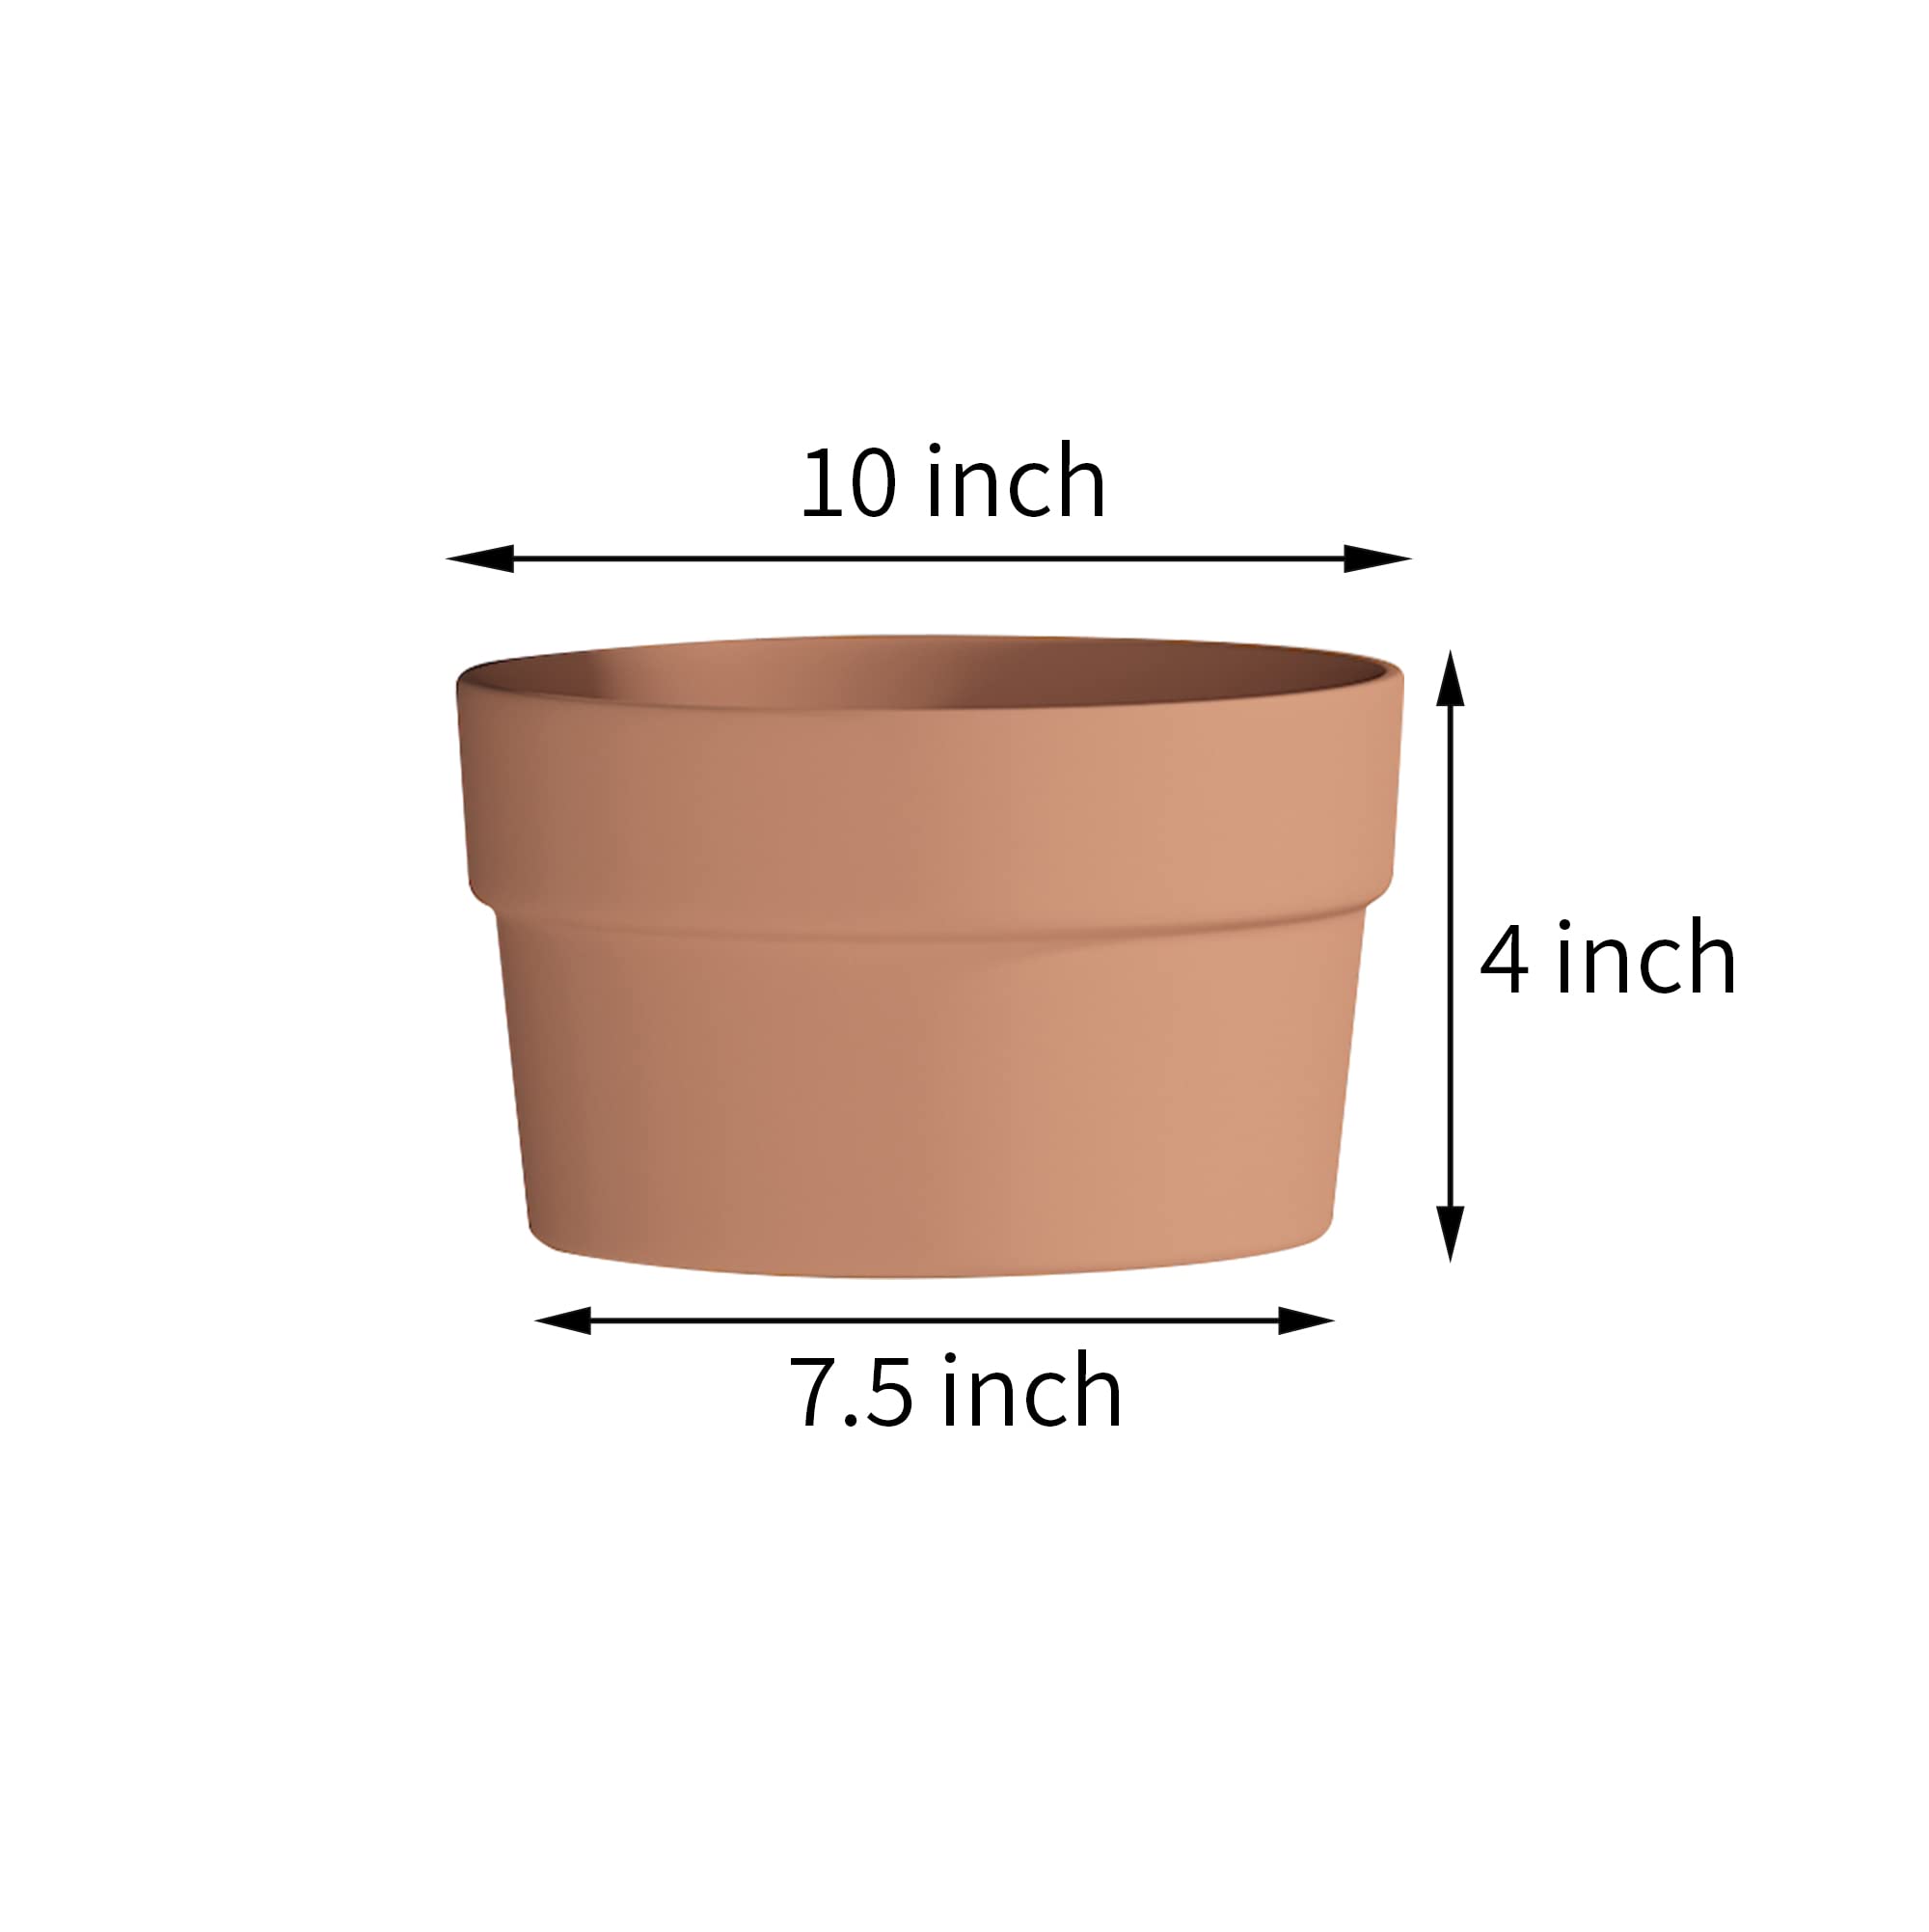 Fcacti 10 Inch Terracotta Shallow Succulent Pot - 2 Pack Large Terra Cotta Clay Pots with Drainage, Round Shallow Terra-Cotta Bonsai Pot for Indoor/Outdoor Plants